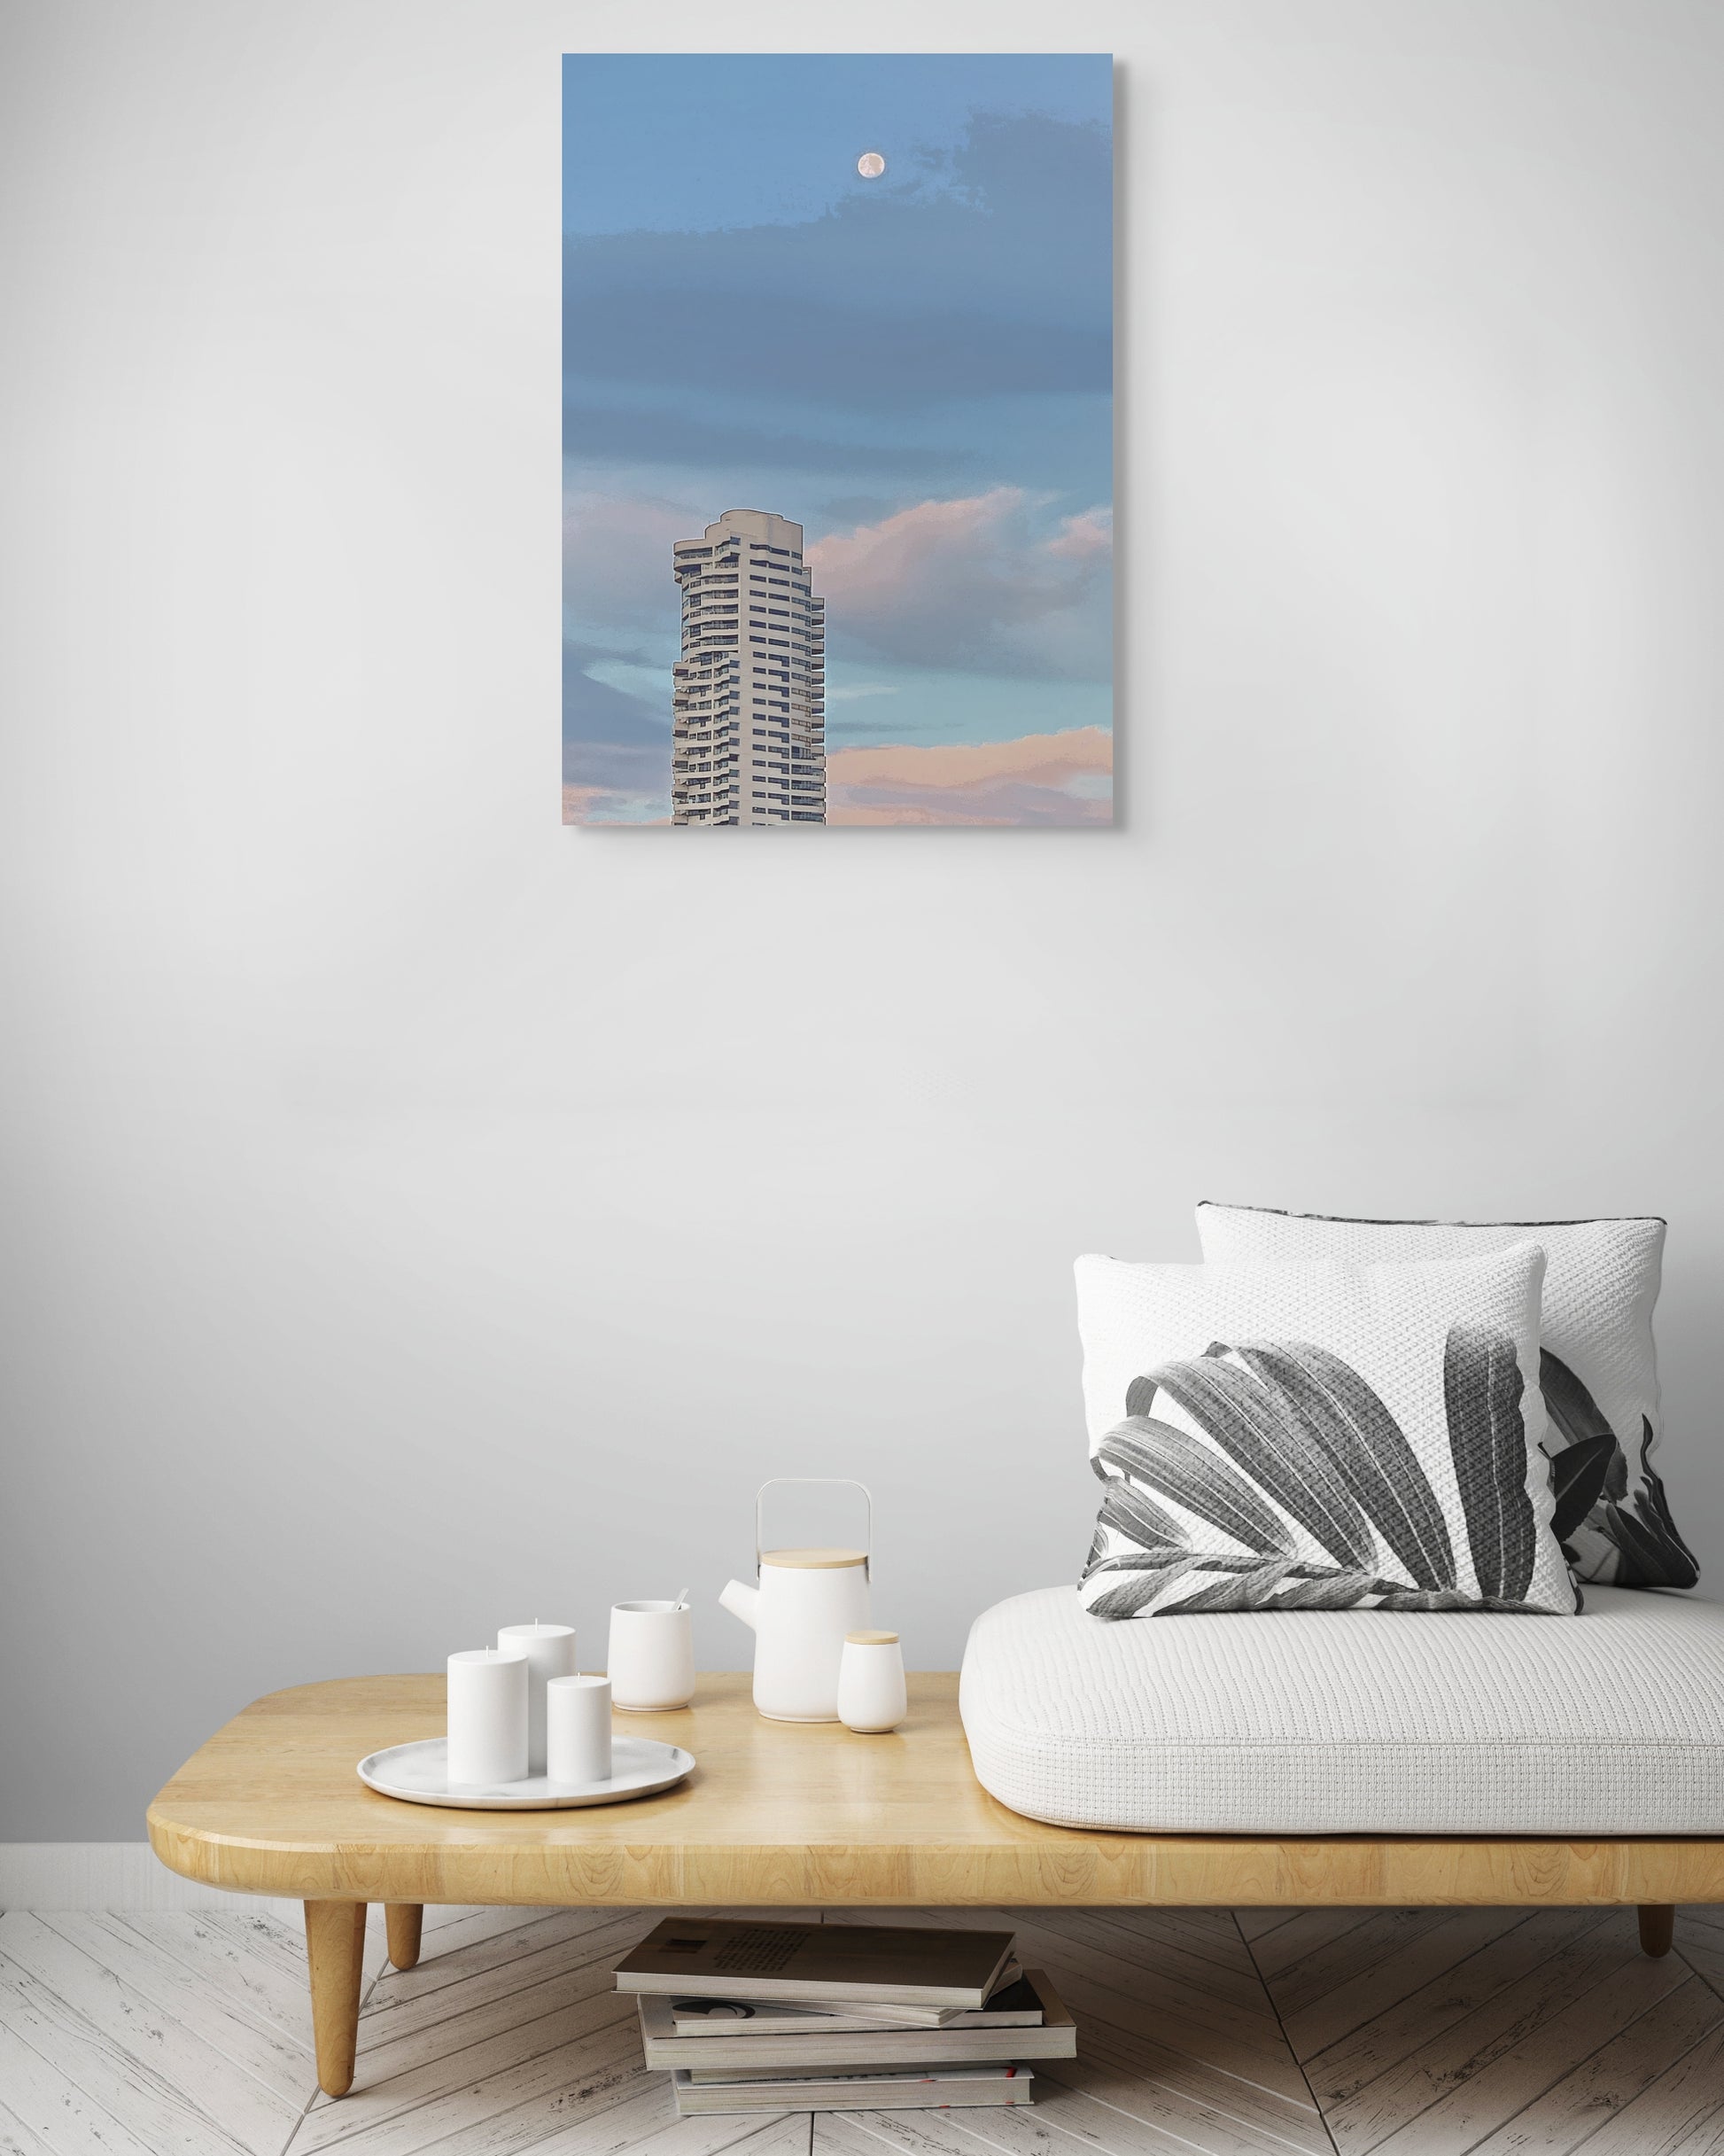 Cityscape at Dusk Canvas Wall Art in lounge room with wooden table and grey cushion